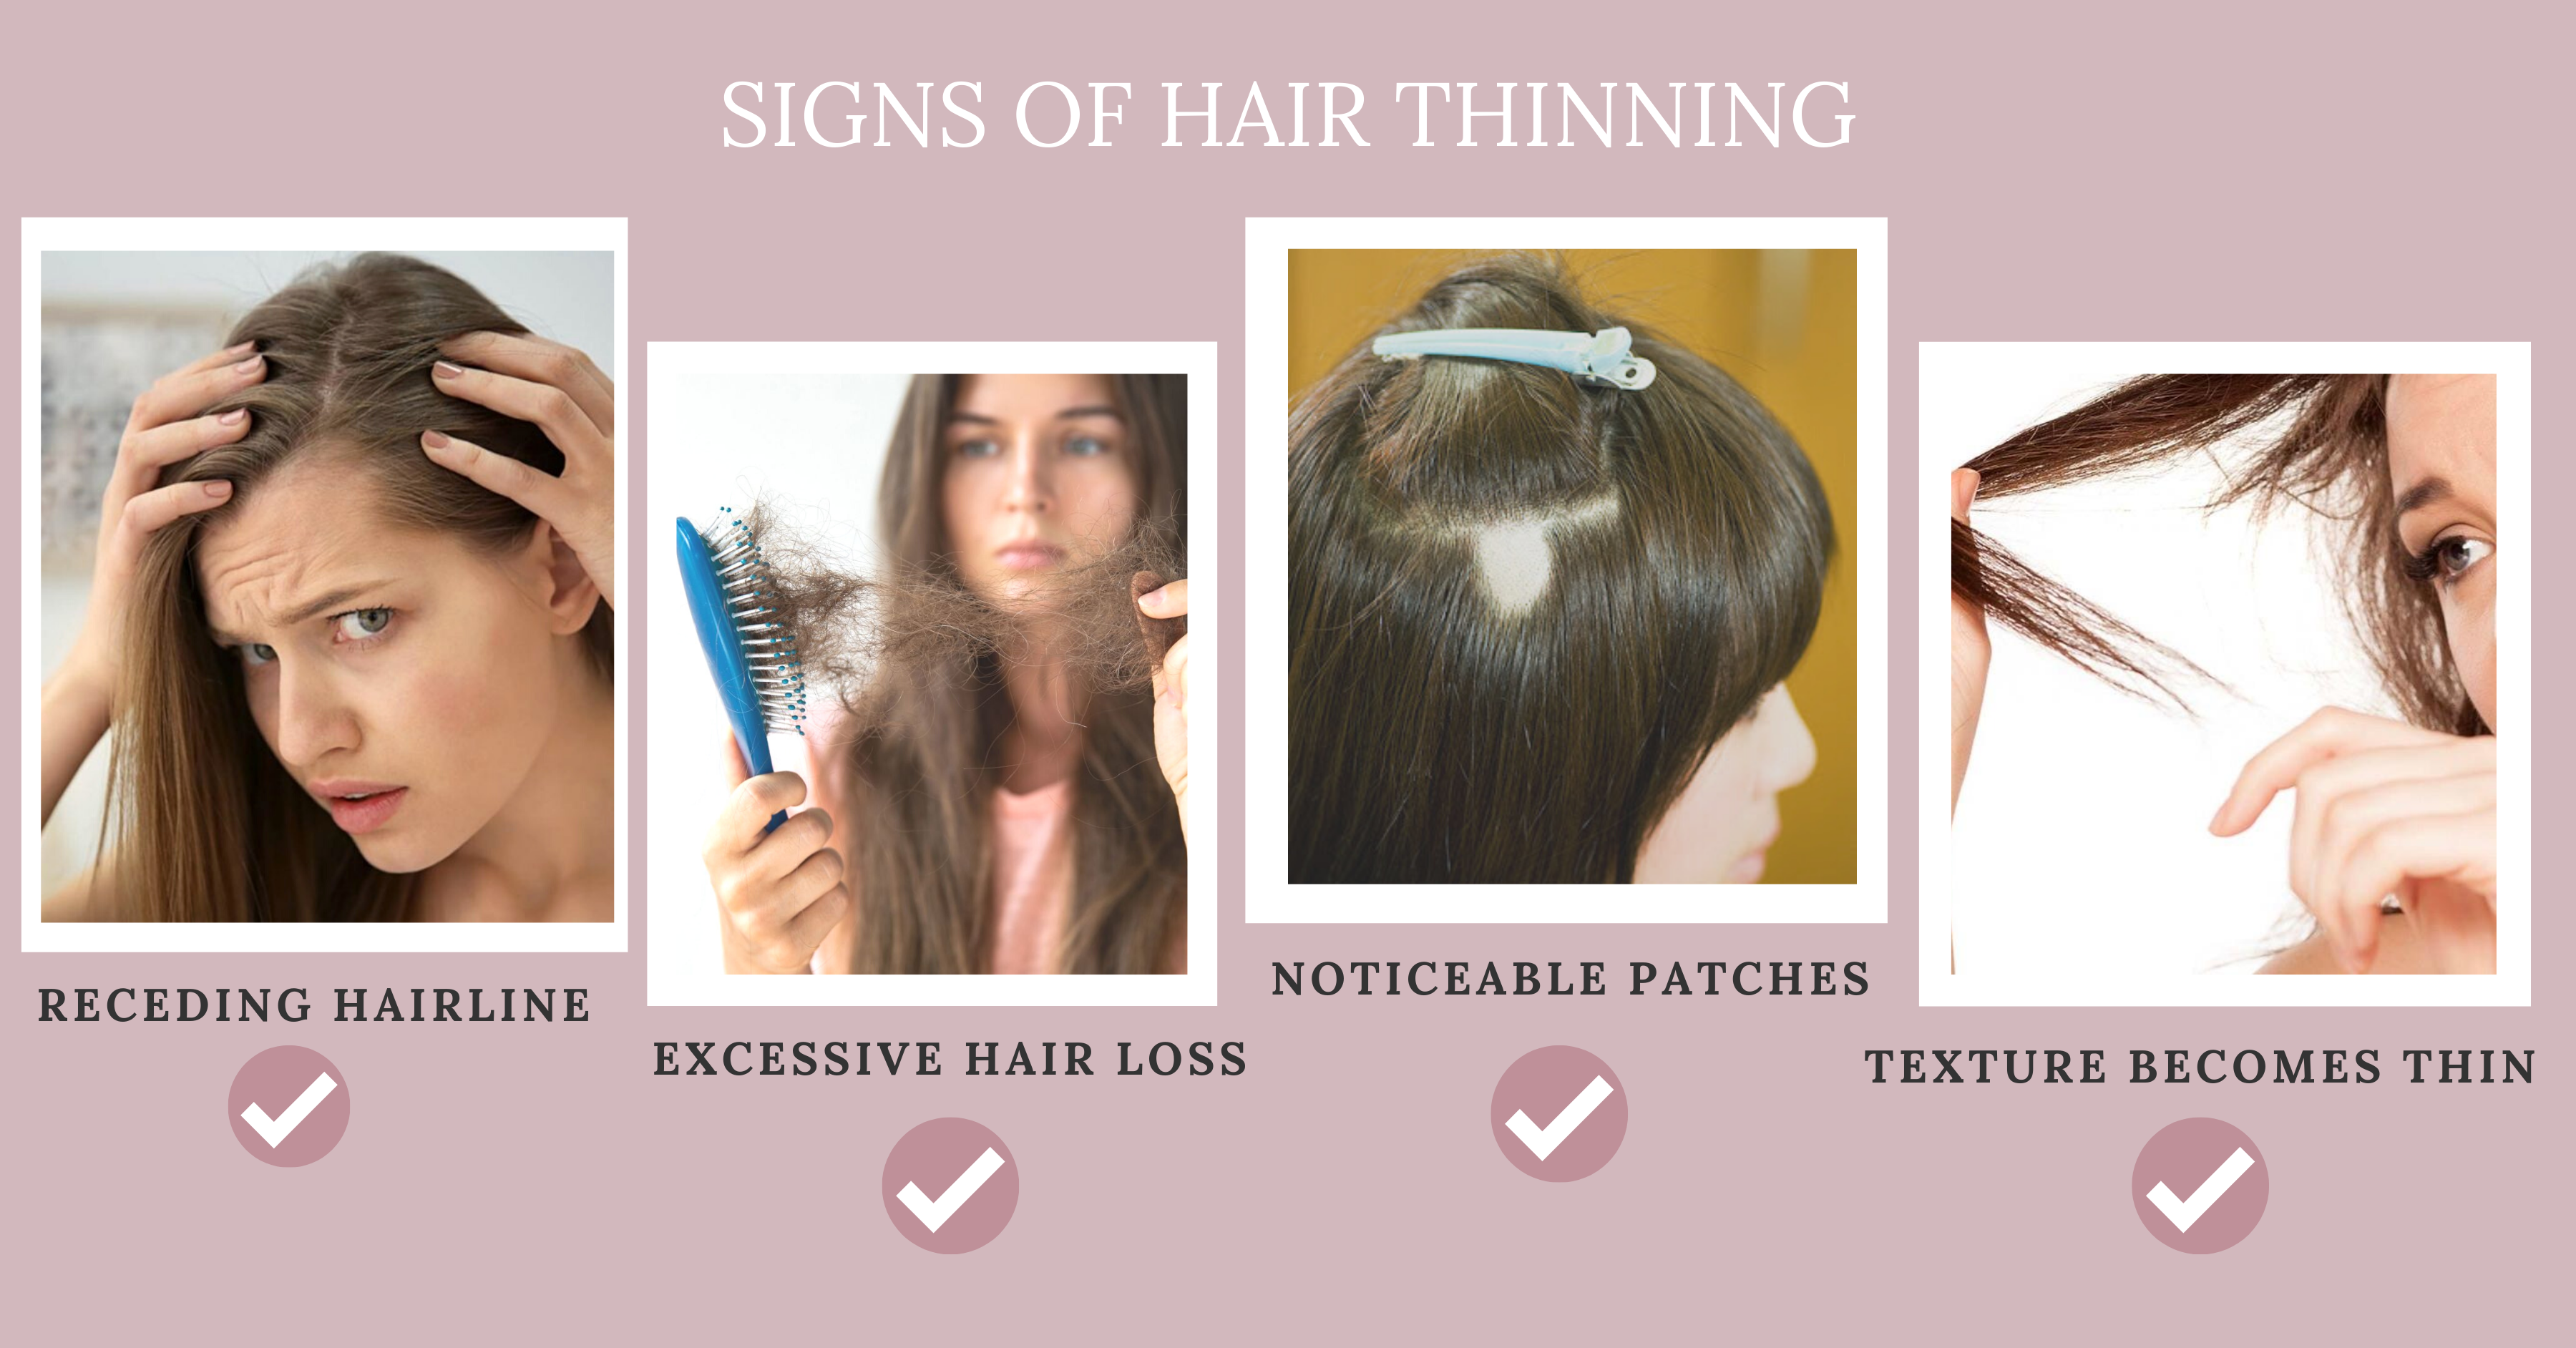 Getting to the Root Causes of Hair Thinning